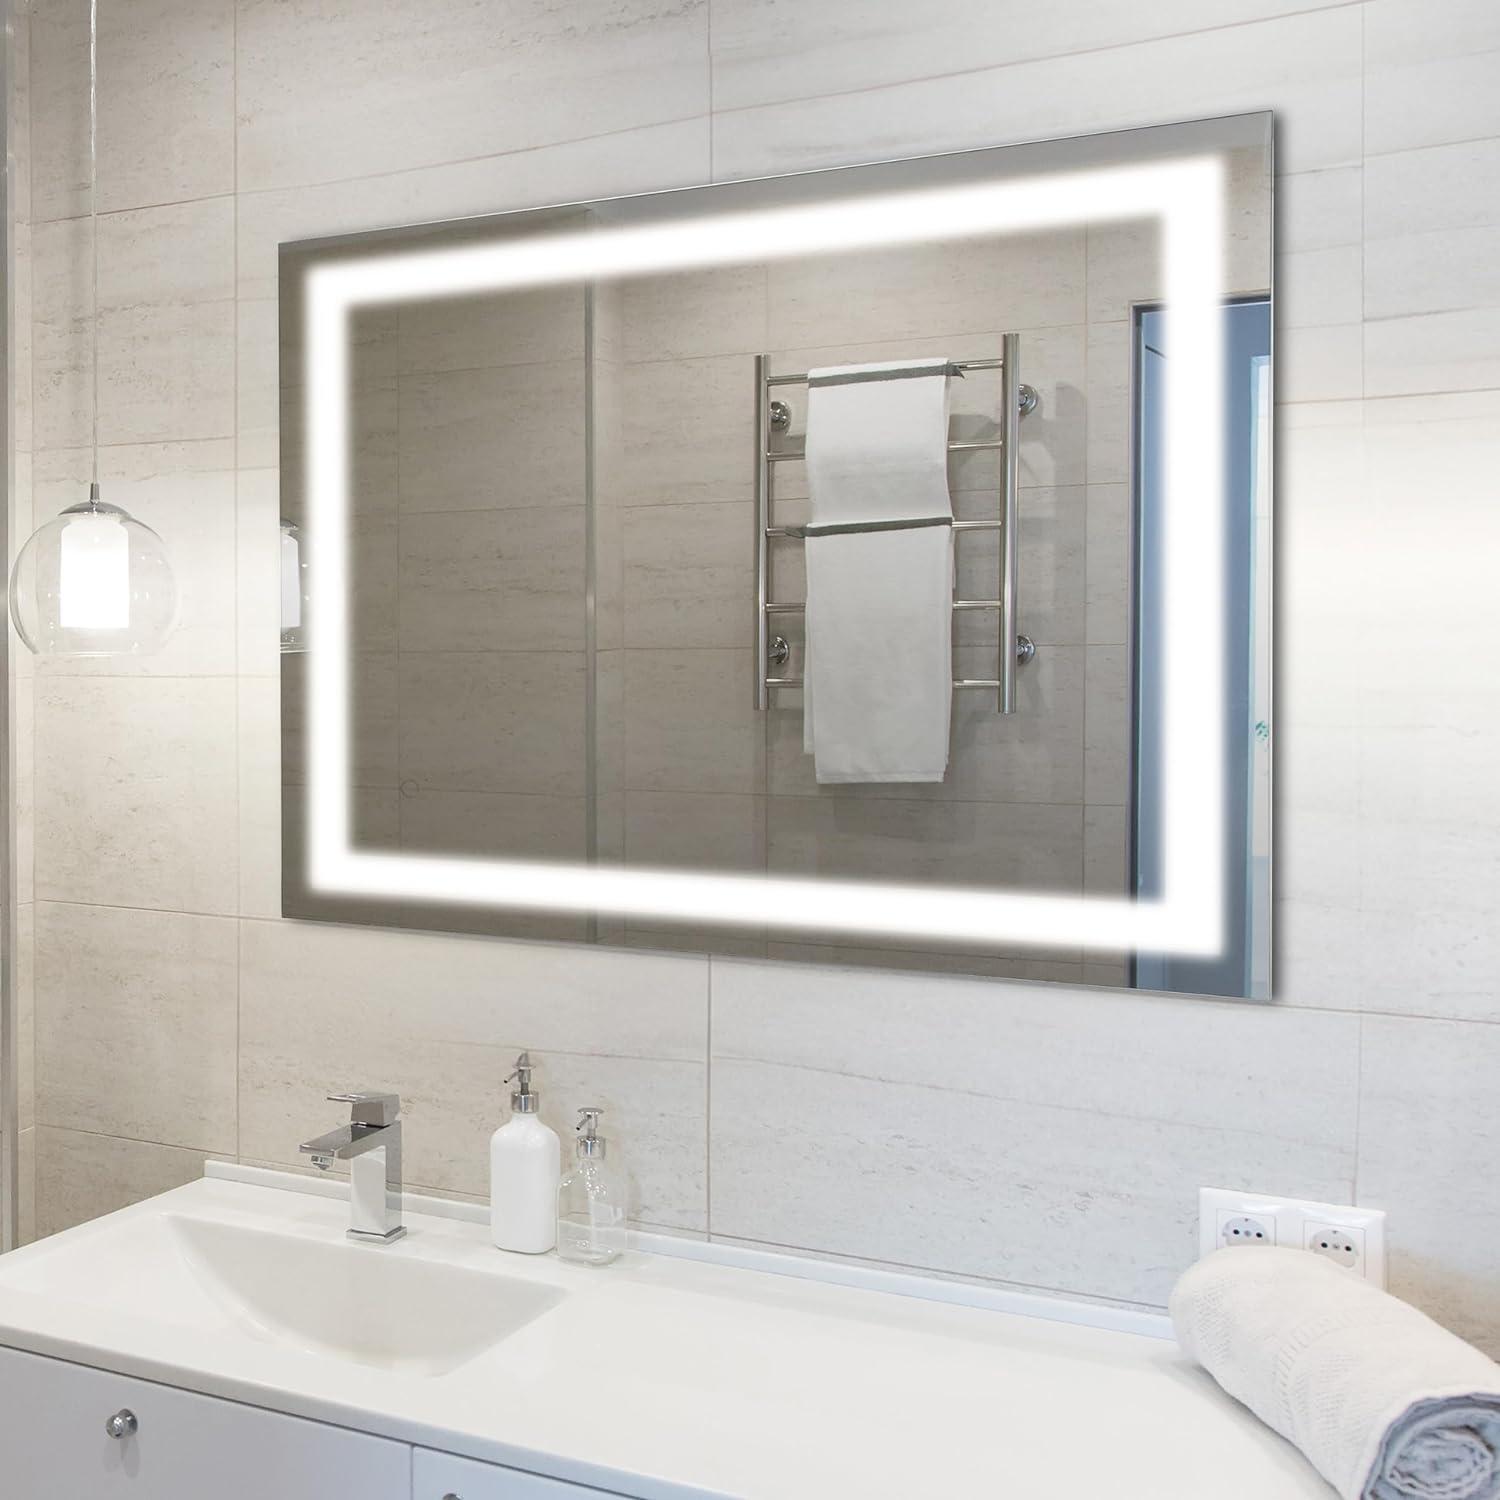 Remy 34.6" x 40.2" Anti-Fog Aluminum LED Bathroom Vanity Mirror with Smart Touch